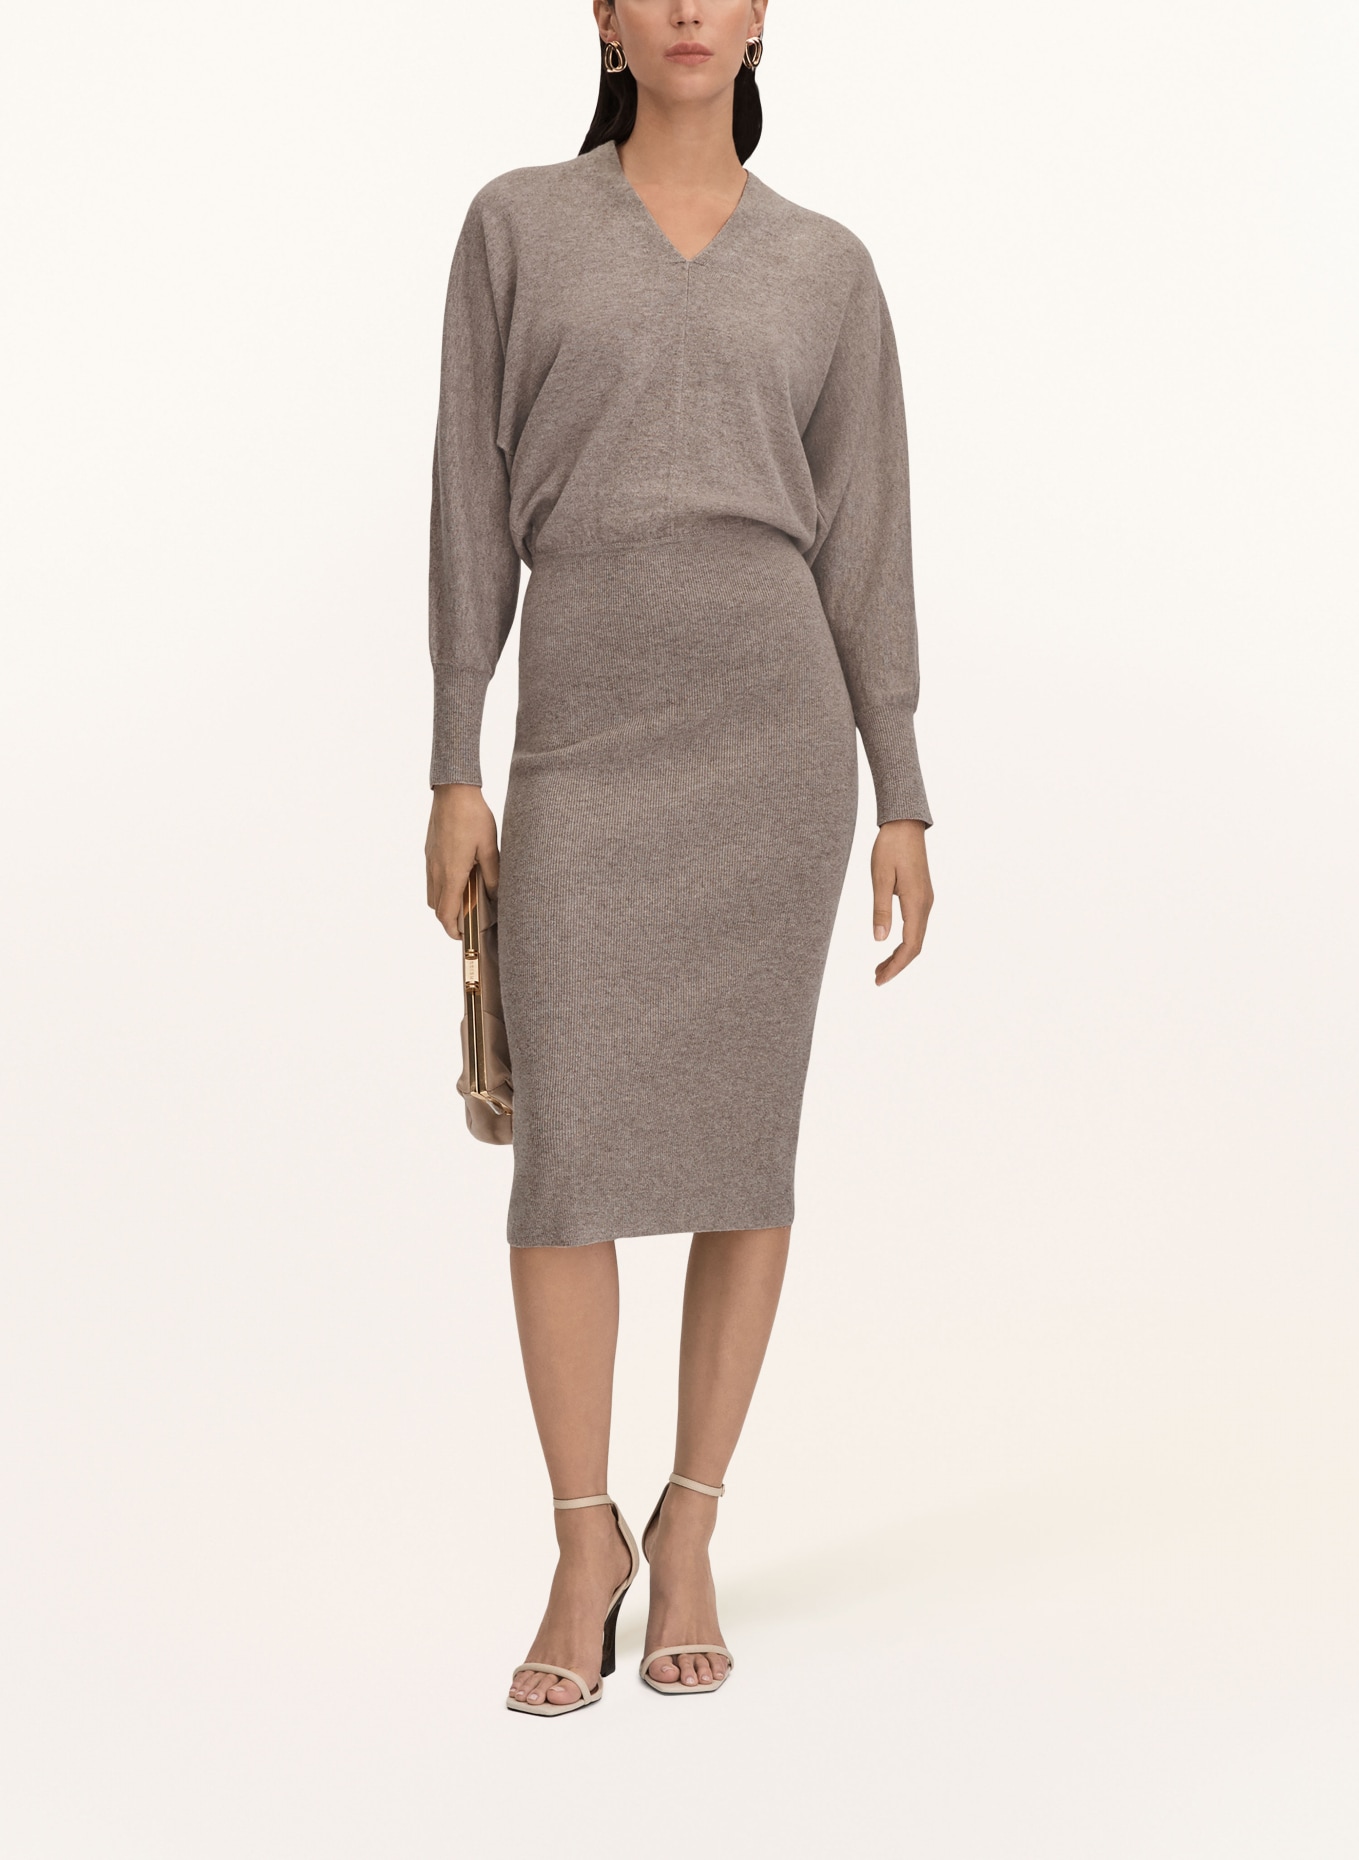 REISS Knit dress SALLY, Color: BEIGE (Image 2)